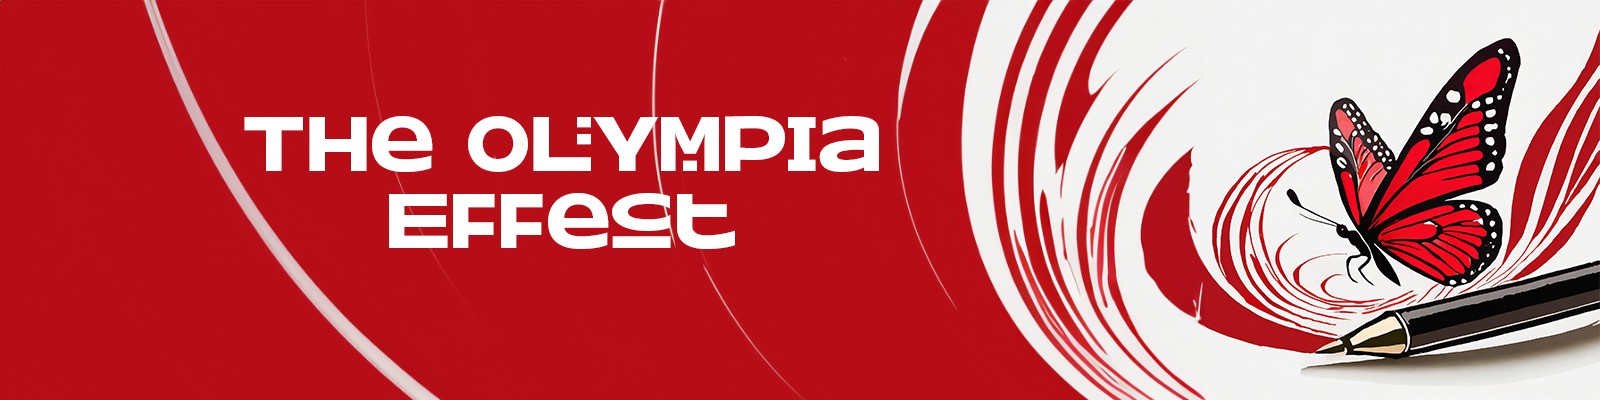 olympiaeffect